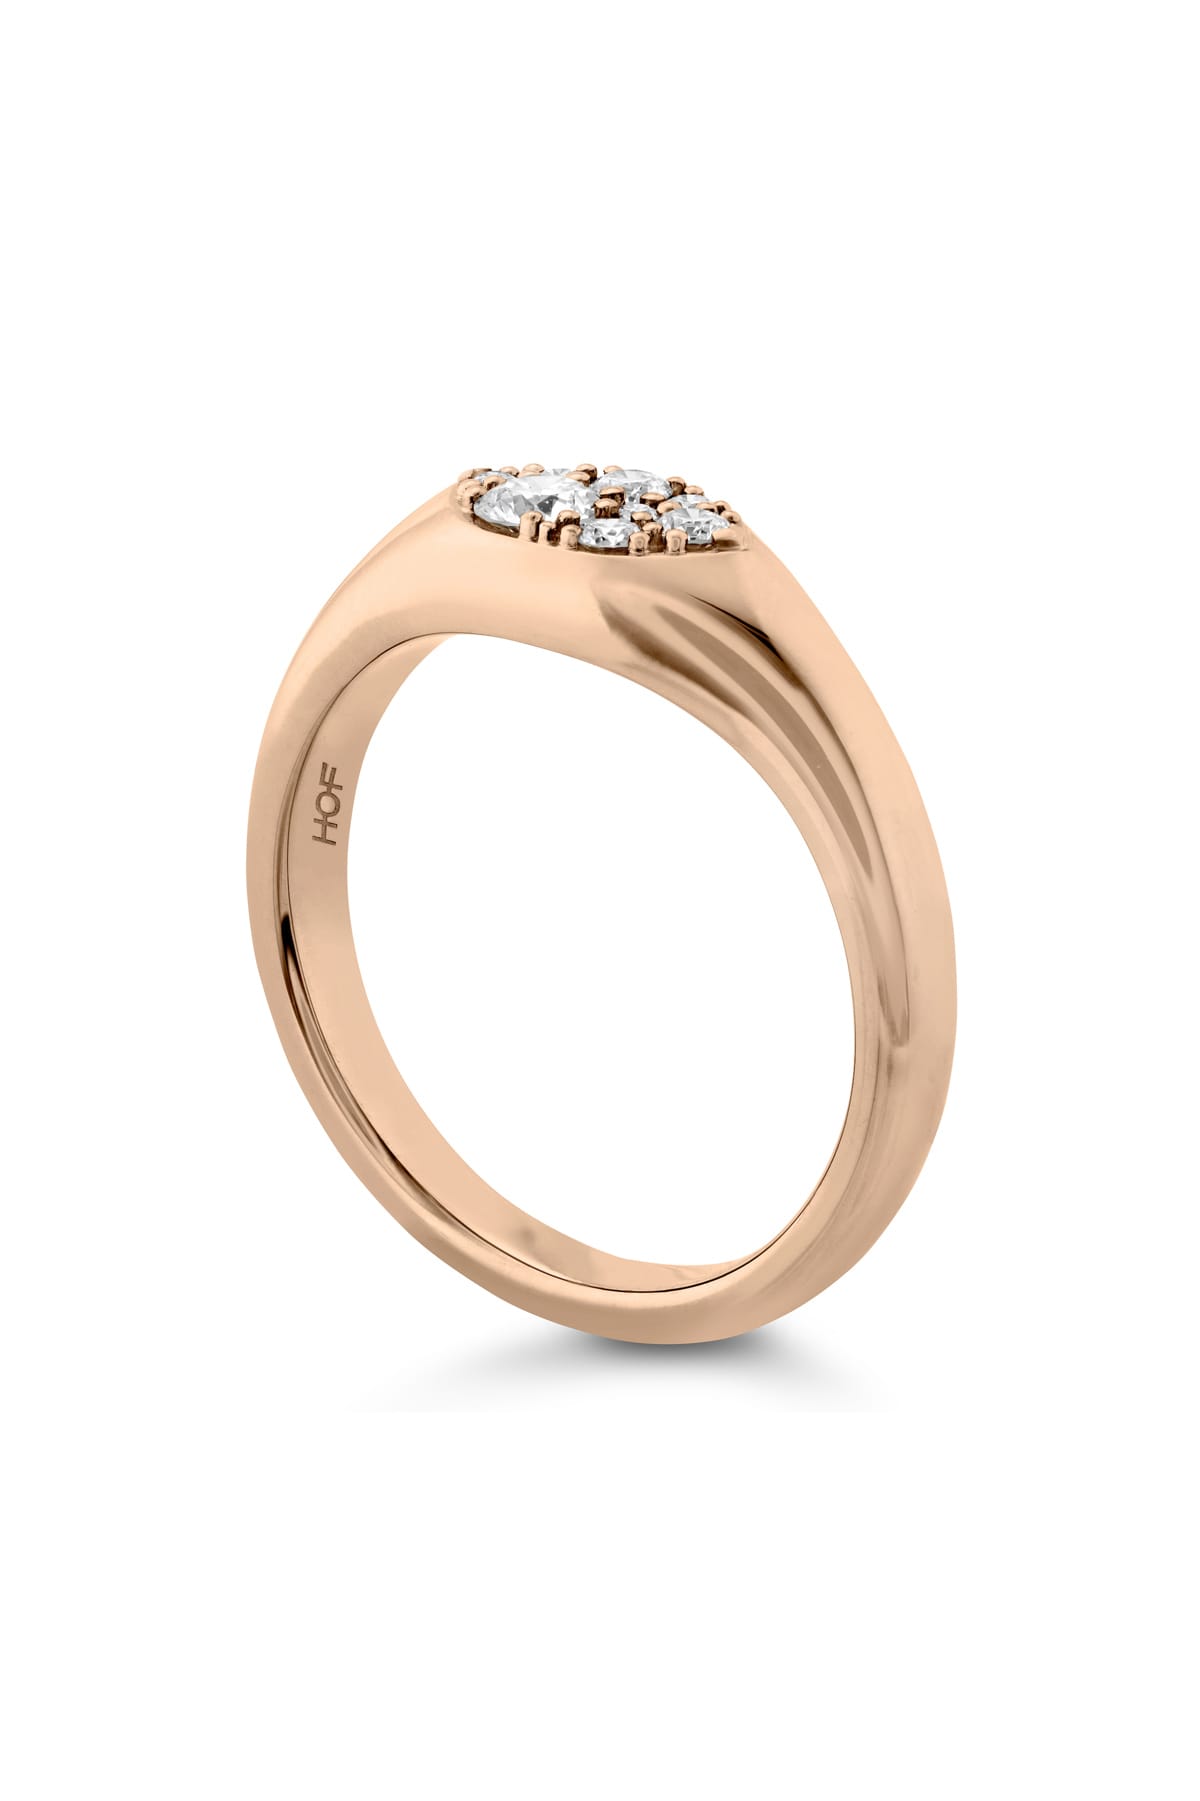 Tessa Navette Signet Ring From Hearts On Fire available at LeGassick Diamonds and Jewellery Gold Coast, Australia.